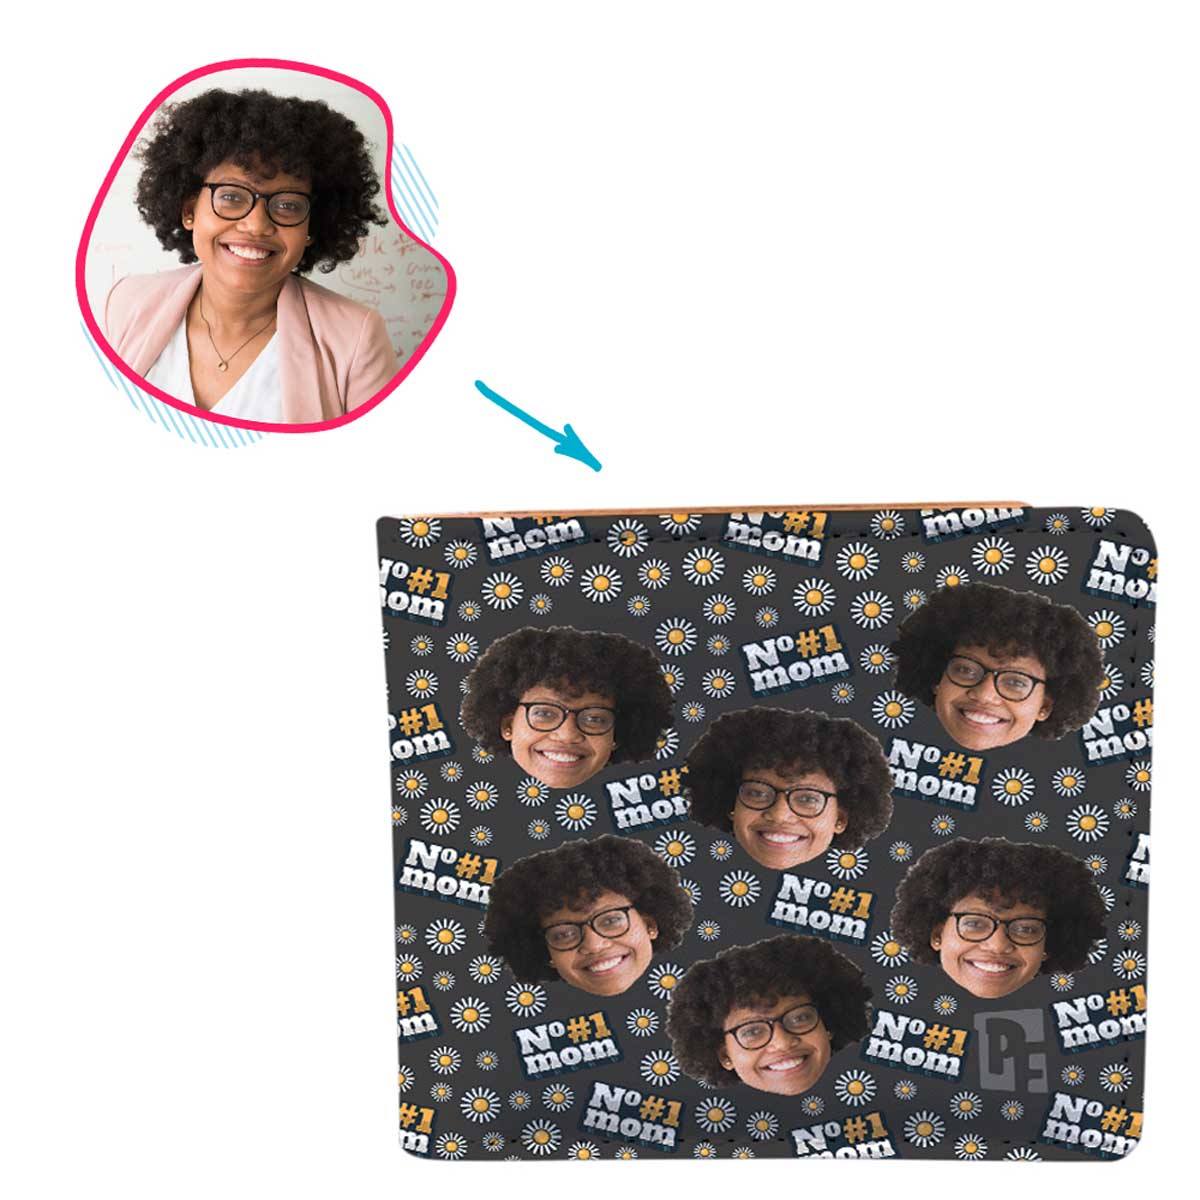 dark #1 Mom wallet personalized with photo of face printed on it